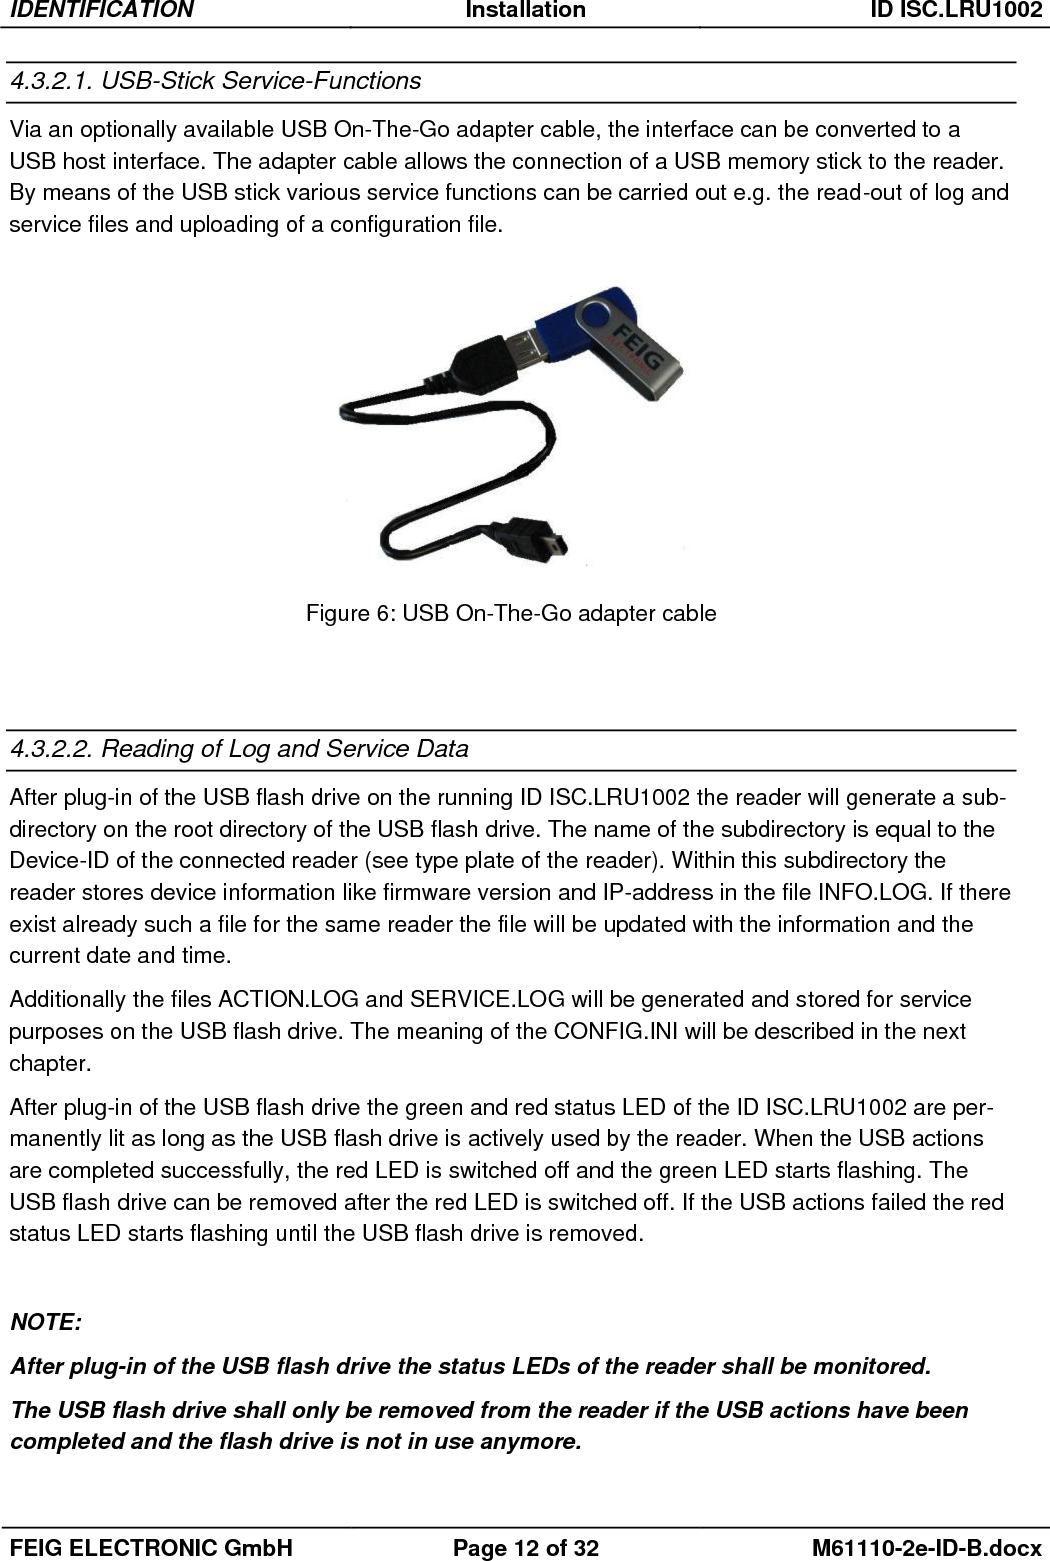 IDENTIFICATION Installation ID ISC.LRU1002  FEIG ELECTRONIC GmbH Page 12 of 32 M61110-2e-ID-B.docx  4.3.2.1. USB-Stick Service-Functions Via an optionally available USB On-The-Go adapter cable, the interface can be converted to a USB host interface. The adapter cable allows the connection of a USB memory stick to the reader. By means of the USB stick various service functions can be carried out e.g. the read-out of log and service files and uploading of a configuration file.  Figure 6: USB On-The-Go adapter cable   4.3.2.2. Reading of Log and Service Data After plug-in of the USB flash drive on the running ID ISC.LRU1002 the reader will generate a sub-directory on the root directory of the USB flash drive. The name of the subdirectory is equal to the Device-ID of the connected reader (see type plate of the reader). Within this subdirectory the reader stores device information like firmware version and IP-address in the file INFO.LOG. If there exist already such a file for the same reader the file will be updated with the information and the current date and time. Additionally the files ACTION.LOG and SERVICE.LOG will be generated and stored for service purposes on the USB flash drive. The meaning of the CONFIG.INI will be described in the next chapter. After plug-in of the USB flash drive the green and red status LED of the ID ISC.LRU1002 are per-manently lit as long as the USB flash drive is actively used by the reader. When the USB actions are completed successfully, the red LED is switched off and the green LED starts flashing. The USB flash drive can be removed after the red LED is switched off. If the USB actions failed the red status LED starts flashing until the USB flash drive is removed.    NOTE: After plug-in of the USB flash drive the status LEDs of the reader shall be monitored. The USB flash drive shall only be removed from the reader if the USB actions have been completed and the flash drive is not in use anymore.  